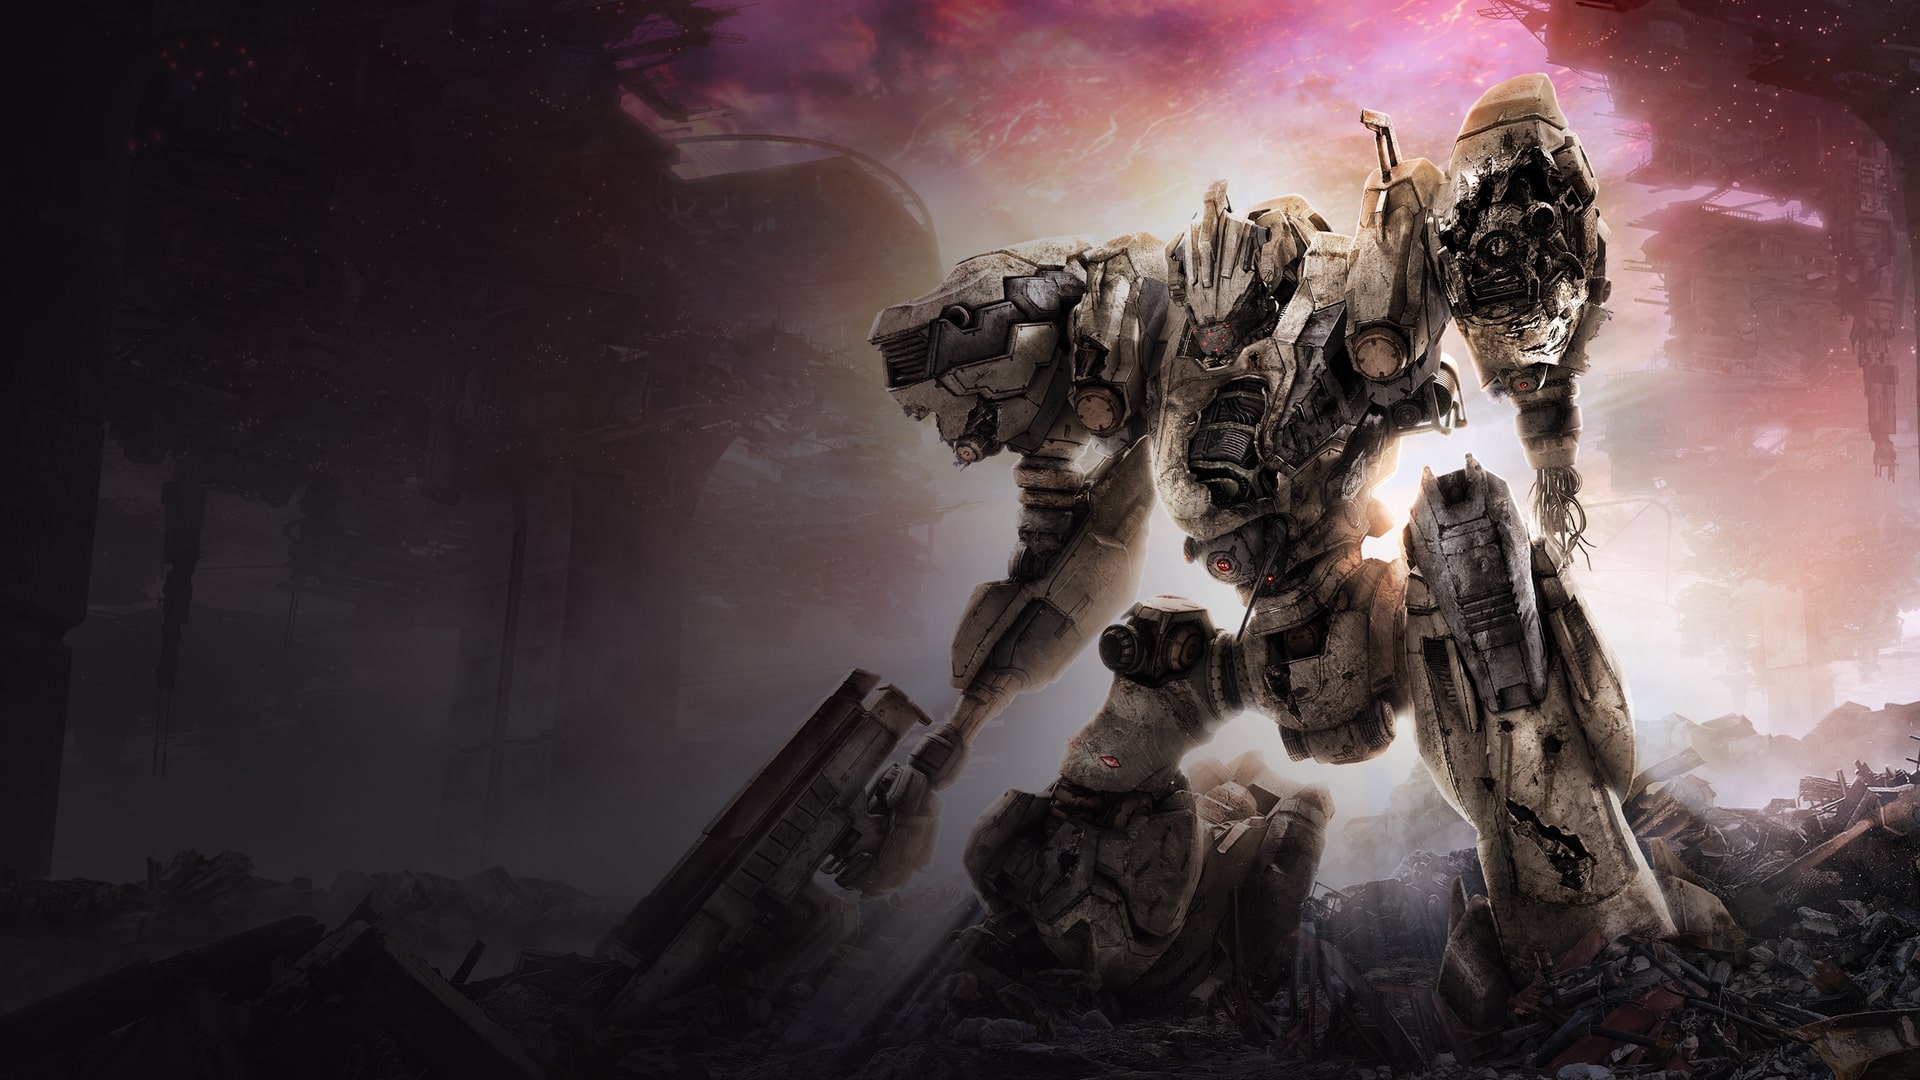 Armored Core 3 Portable Available In US Playstation Store - The